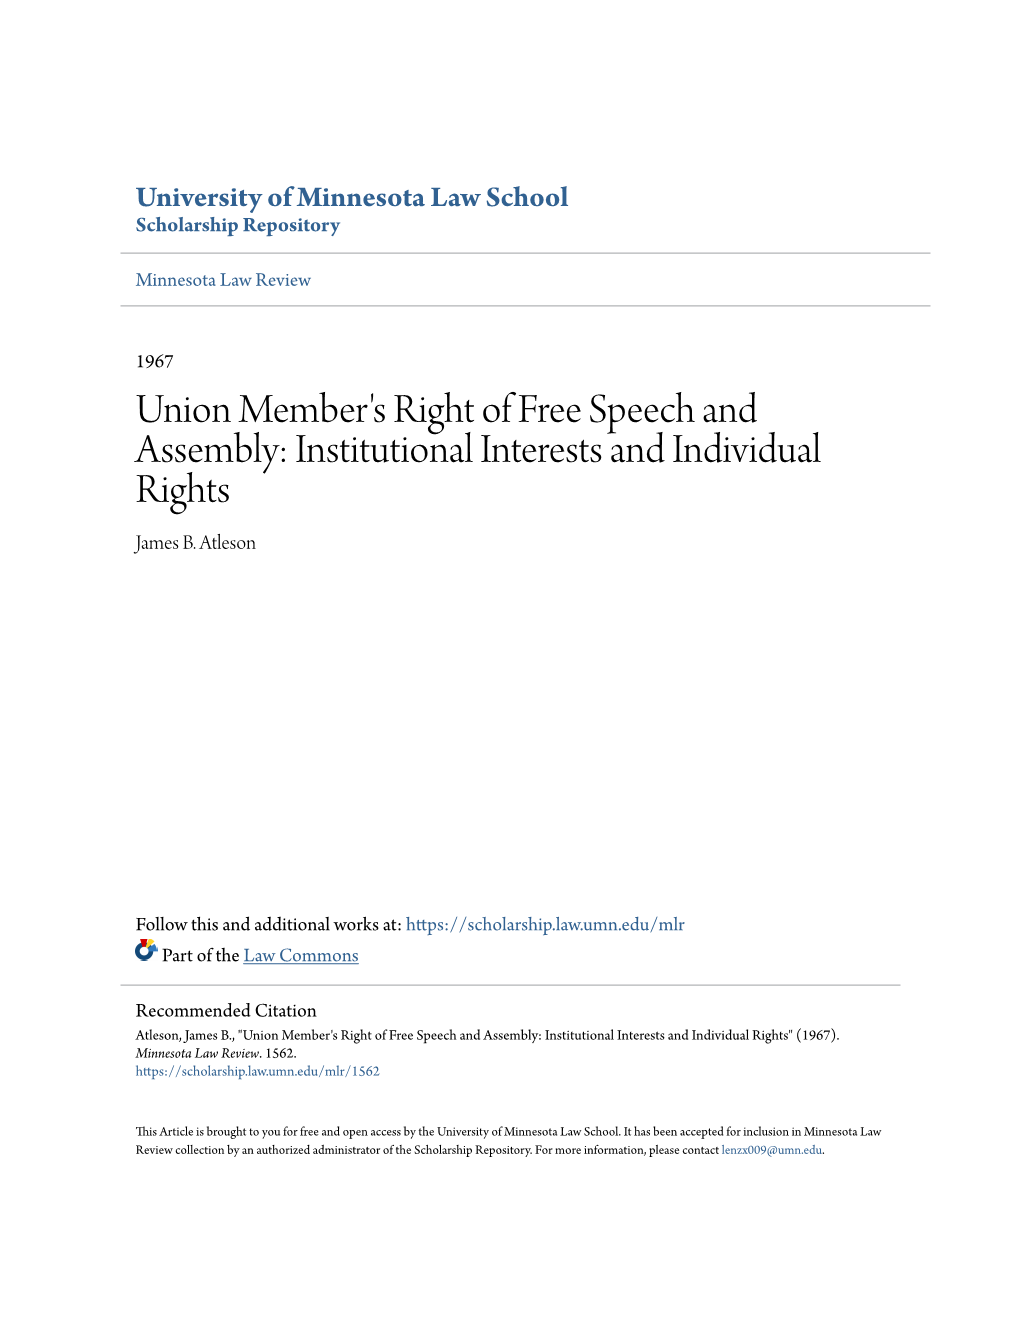 Union Member's Right of Free Speech and Assembly: Institutional Interests and Individual Rights James B